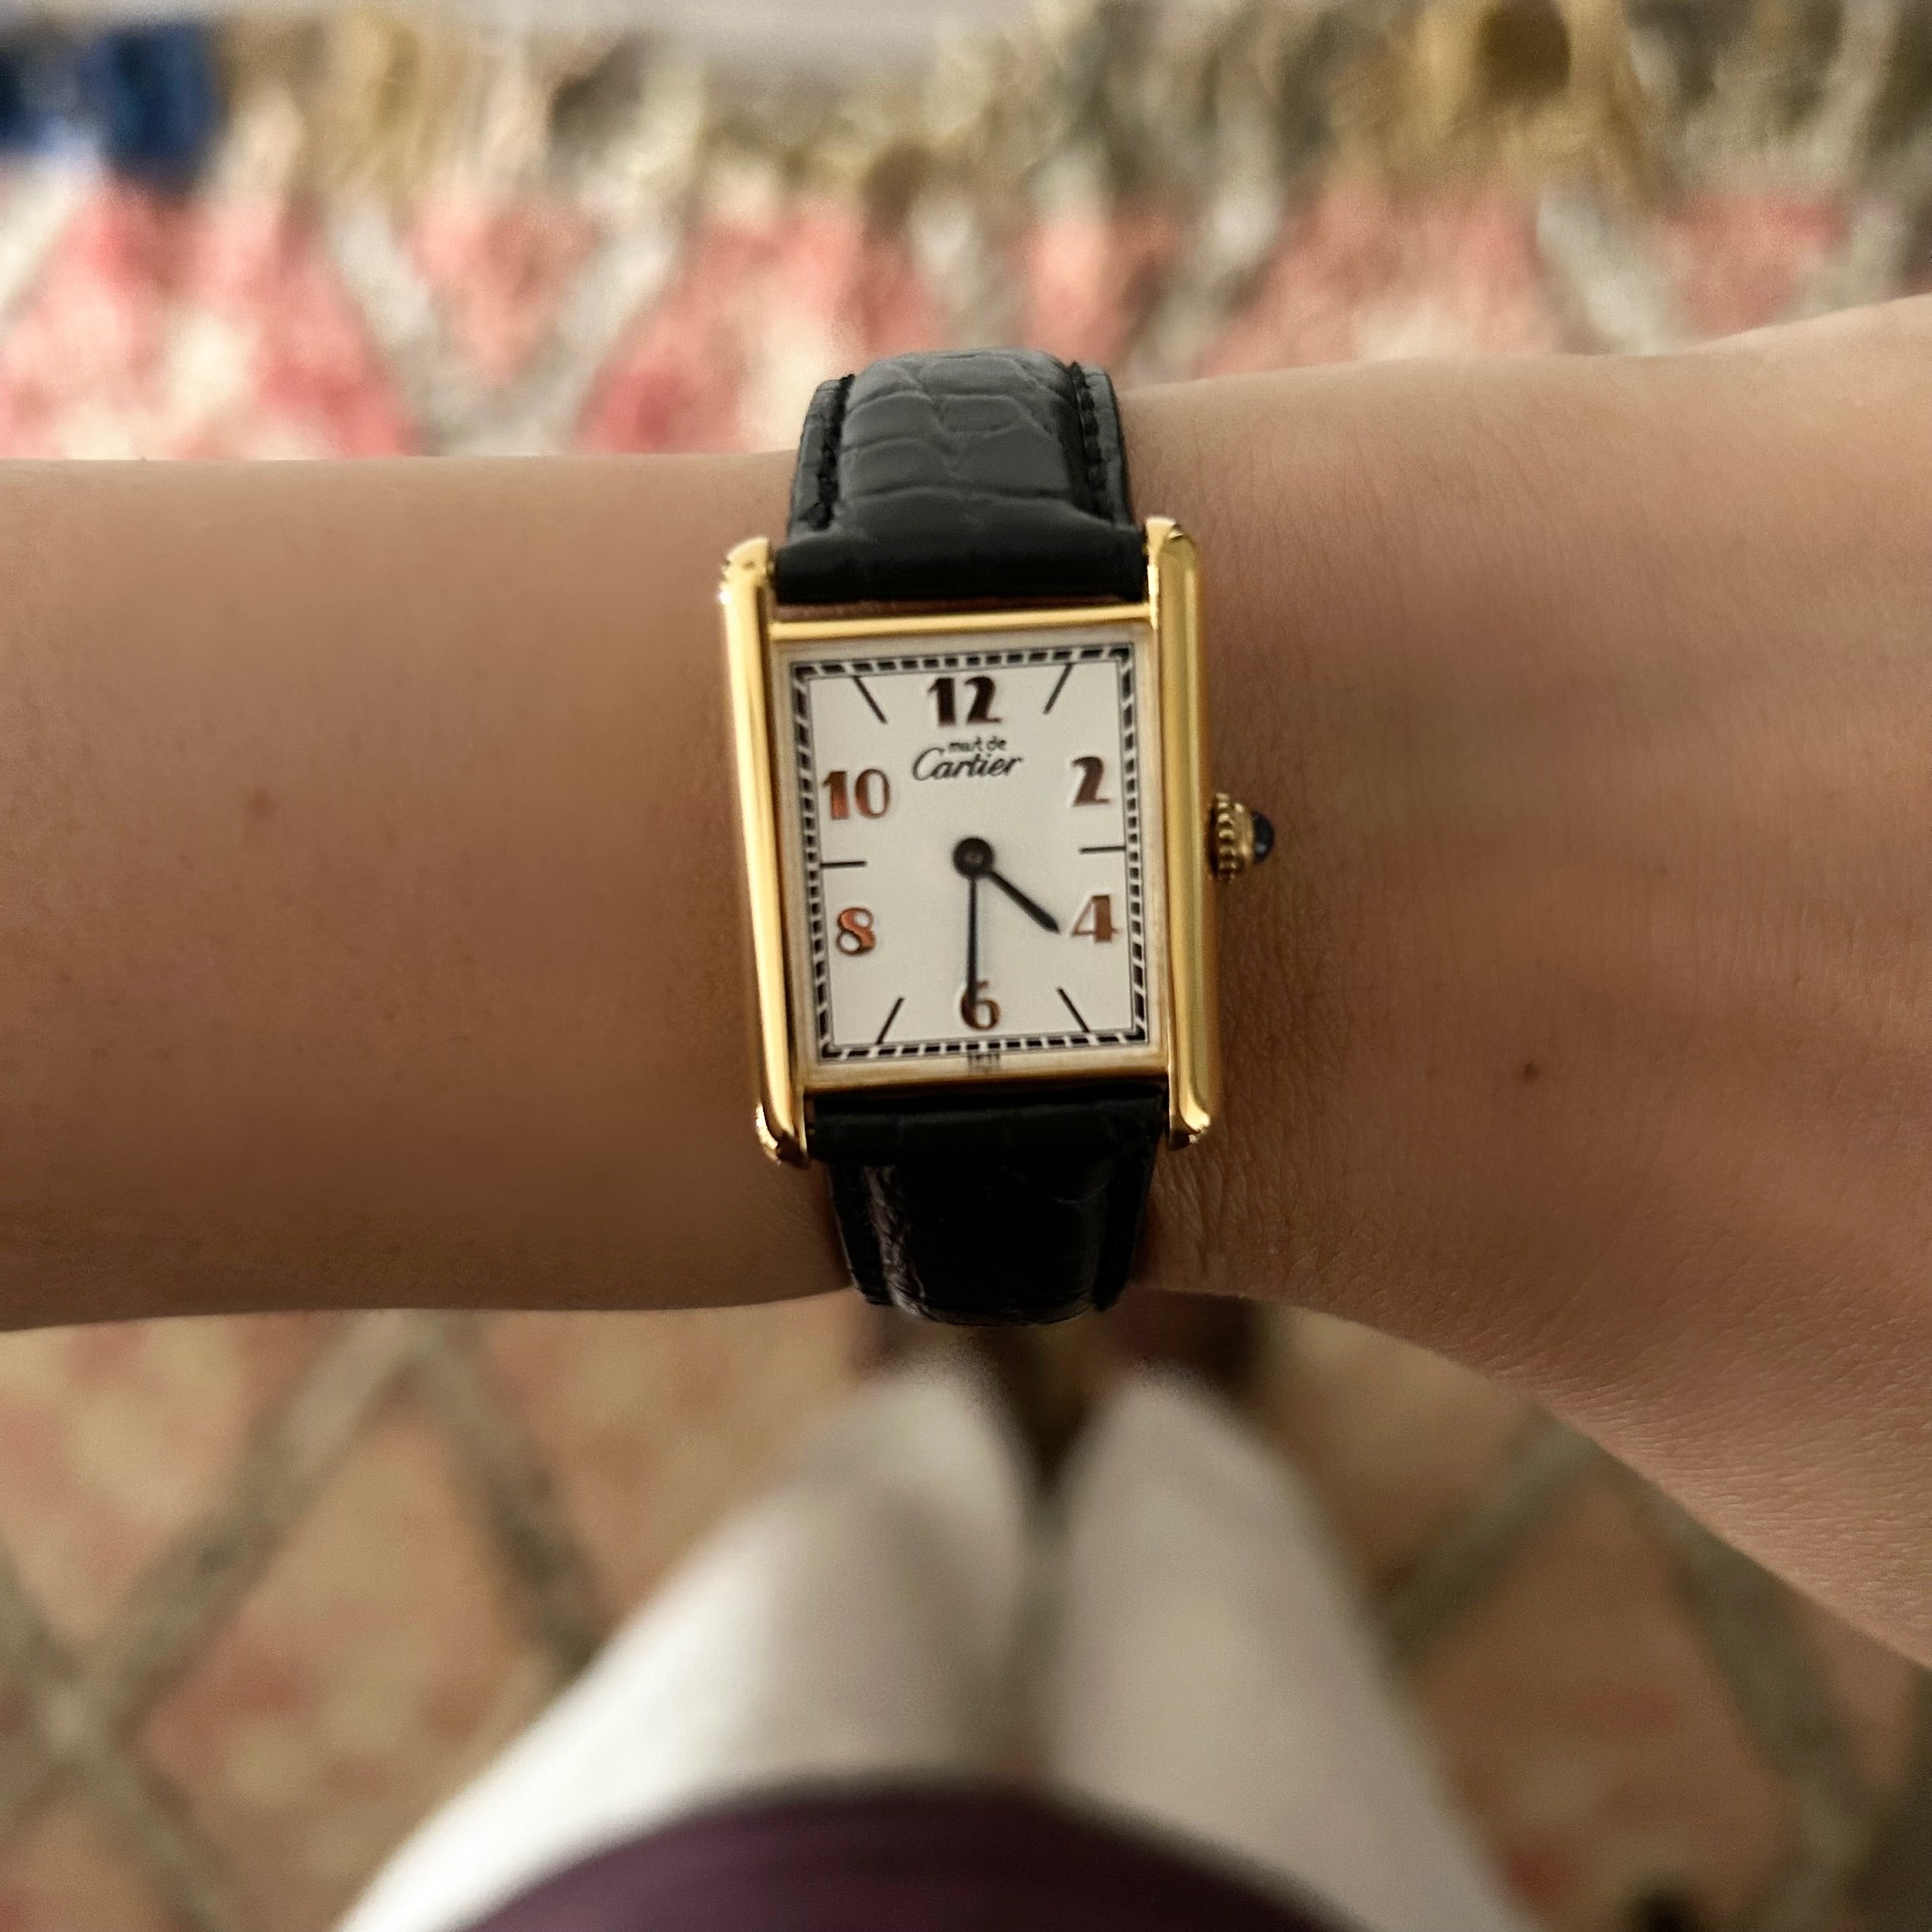 [Cartier] Mast Tank LM Flying Arabia with accessories